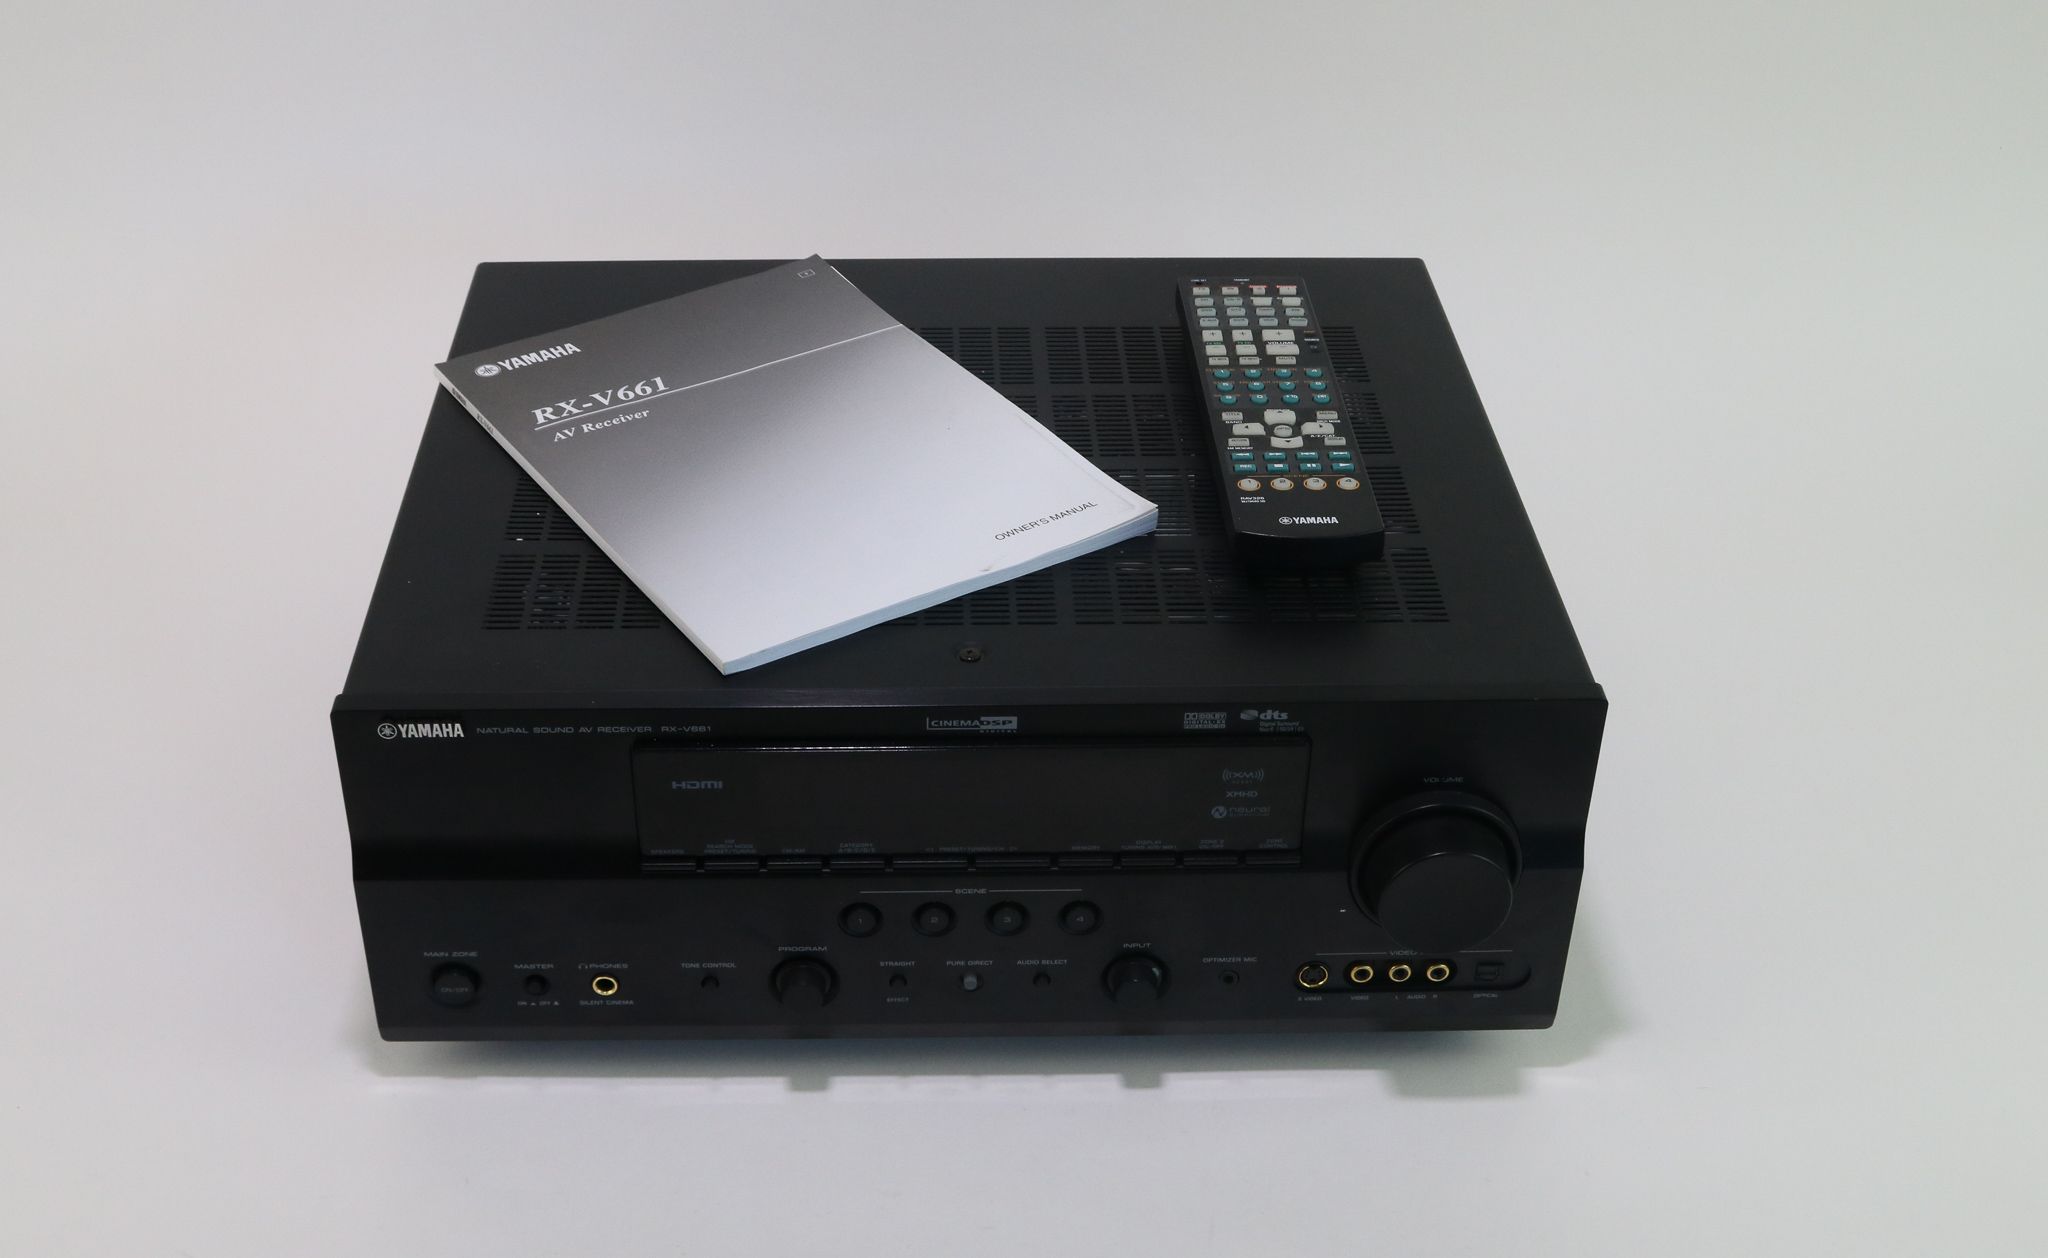 Yamaha Model RX-V661 Surround Sound Stereo Receiver with Remote Control